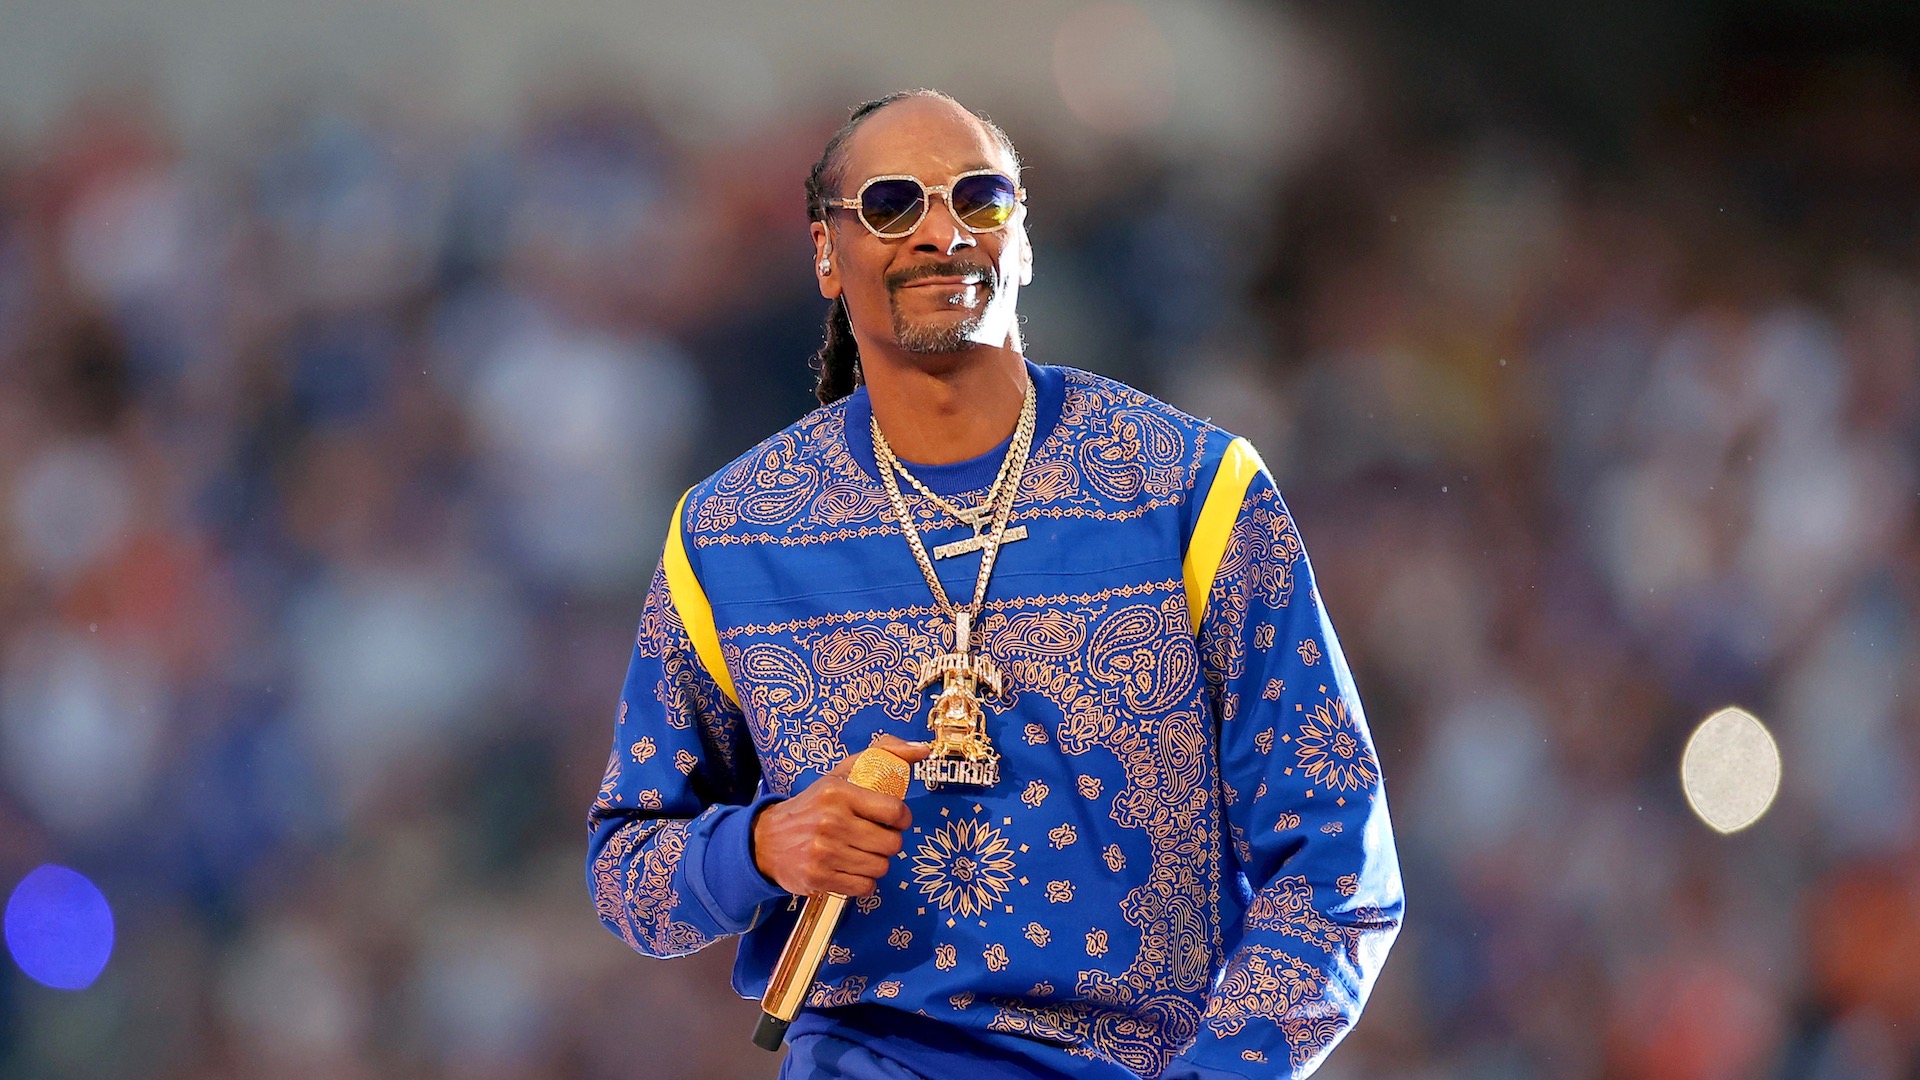 How Old Is Snoop Dogg